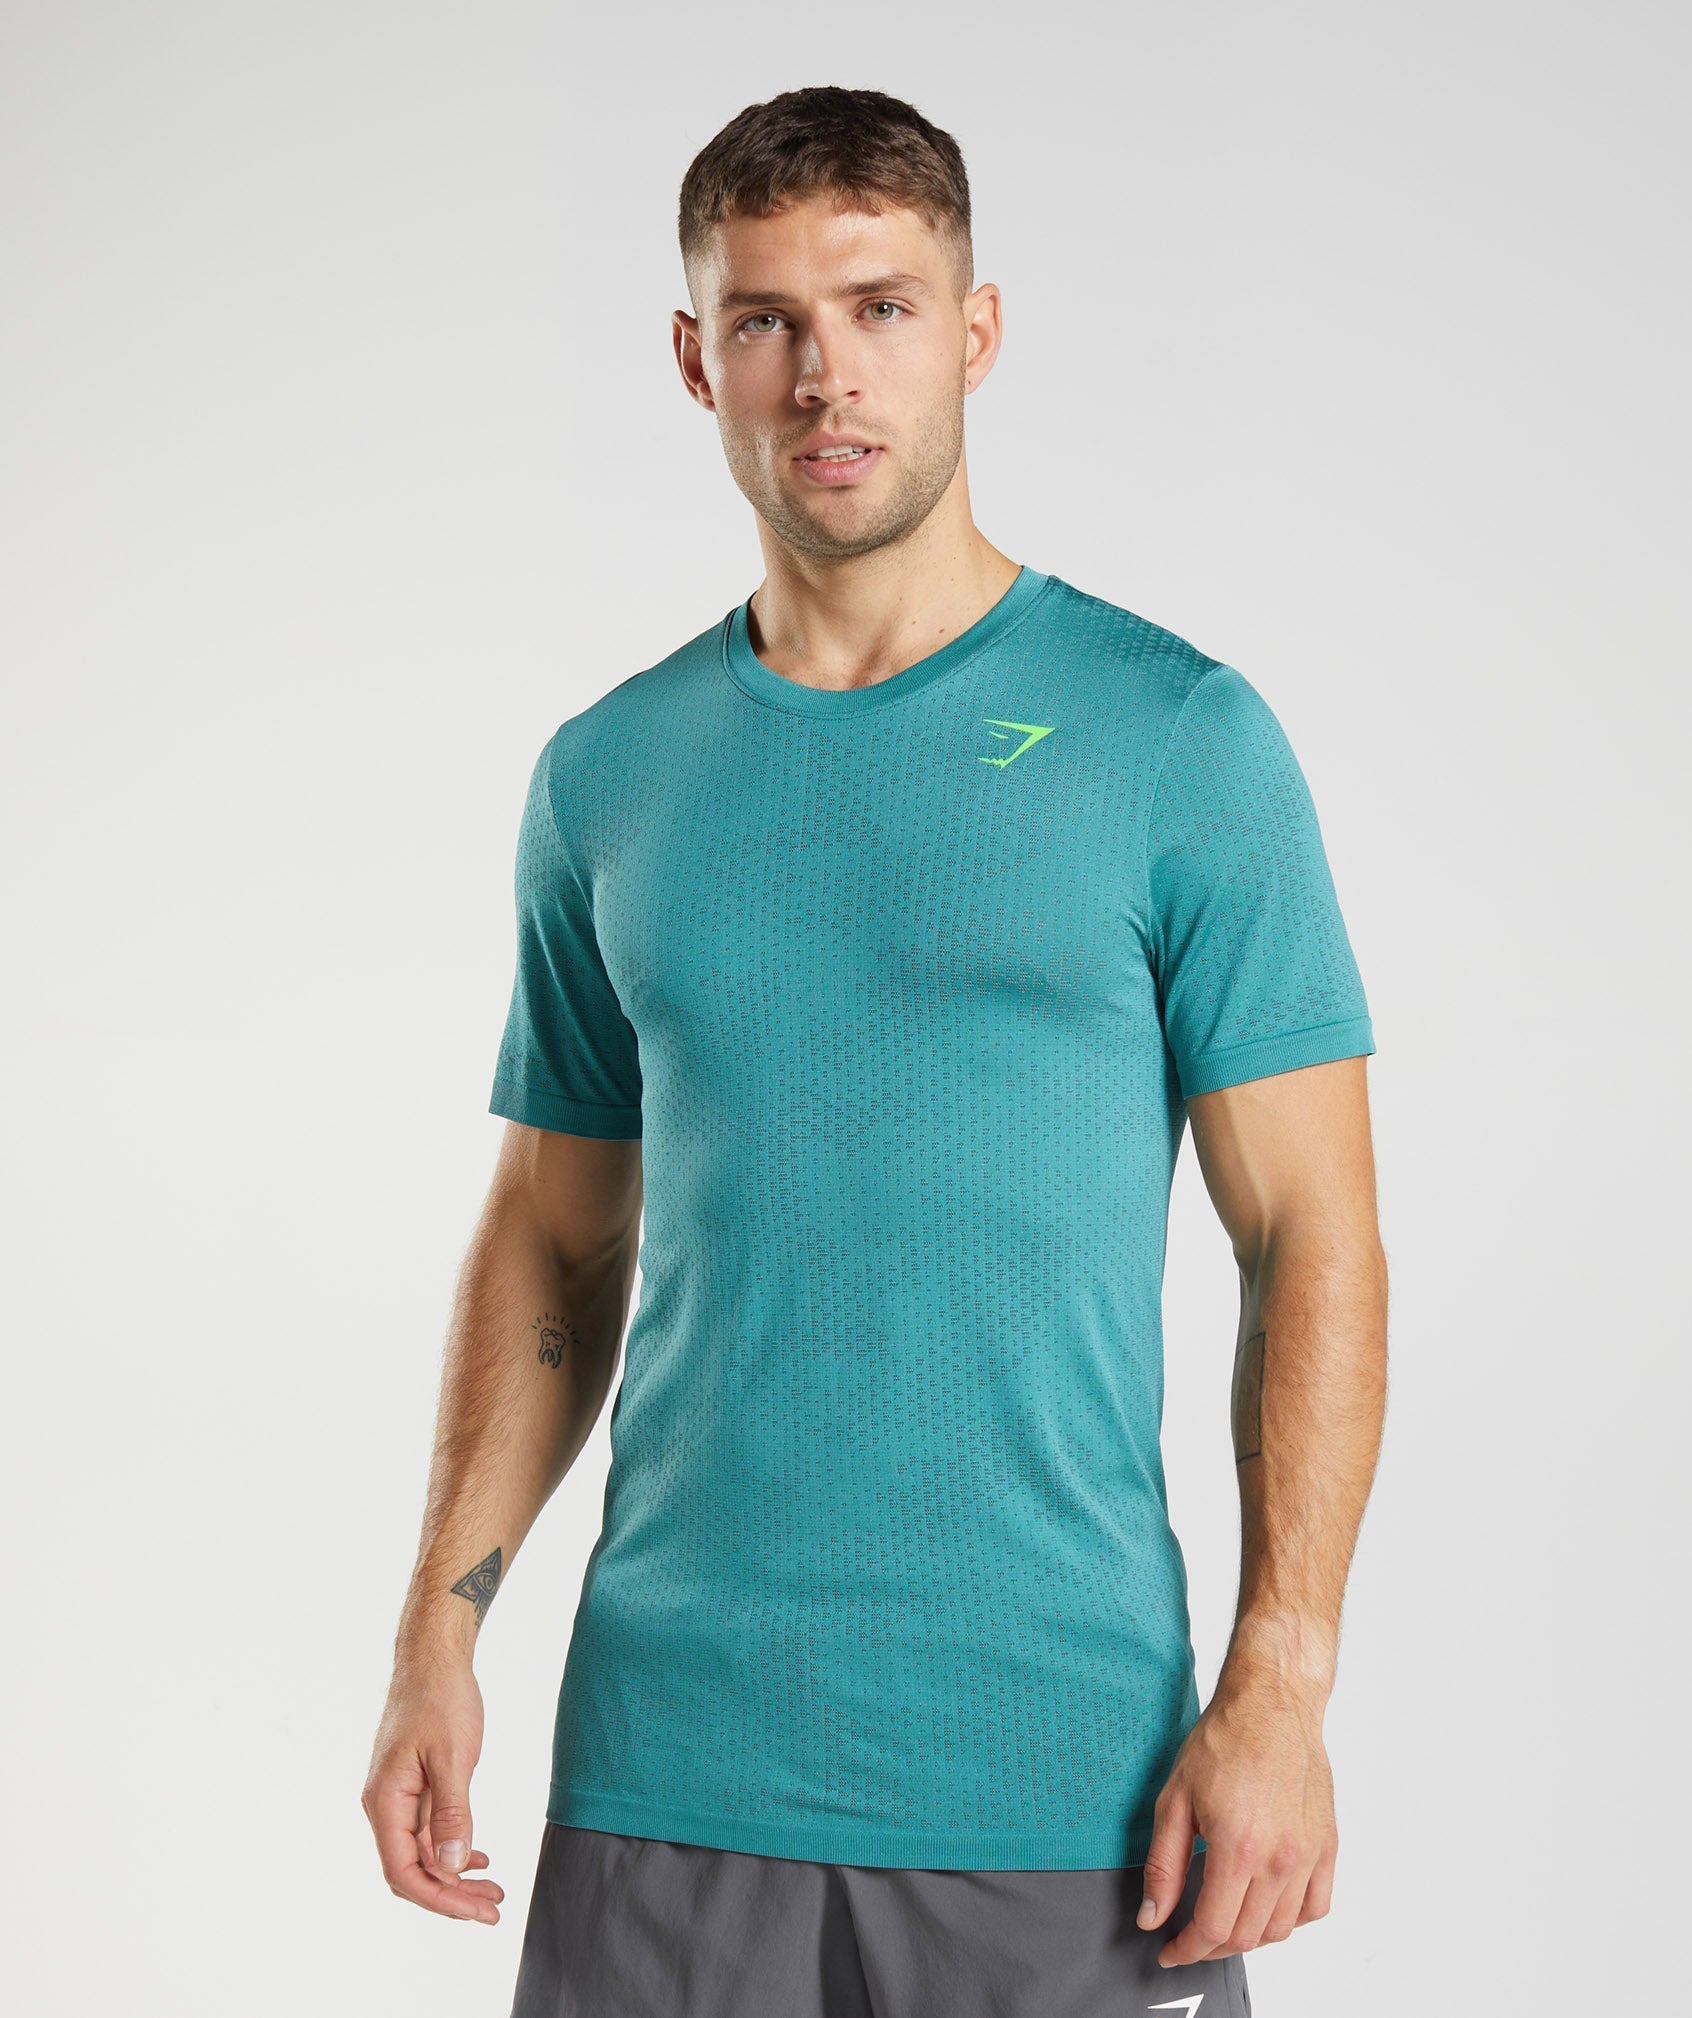 Sport Seamless T-Shirt in Slate Blue/Winter Teal - view 1